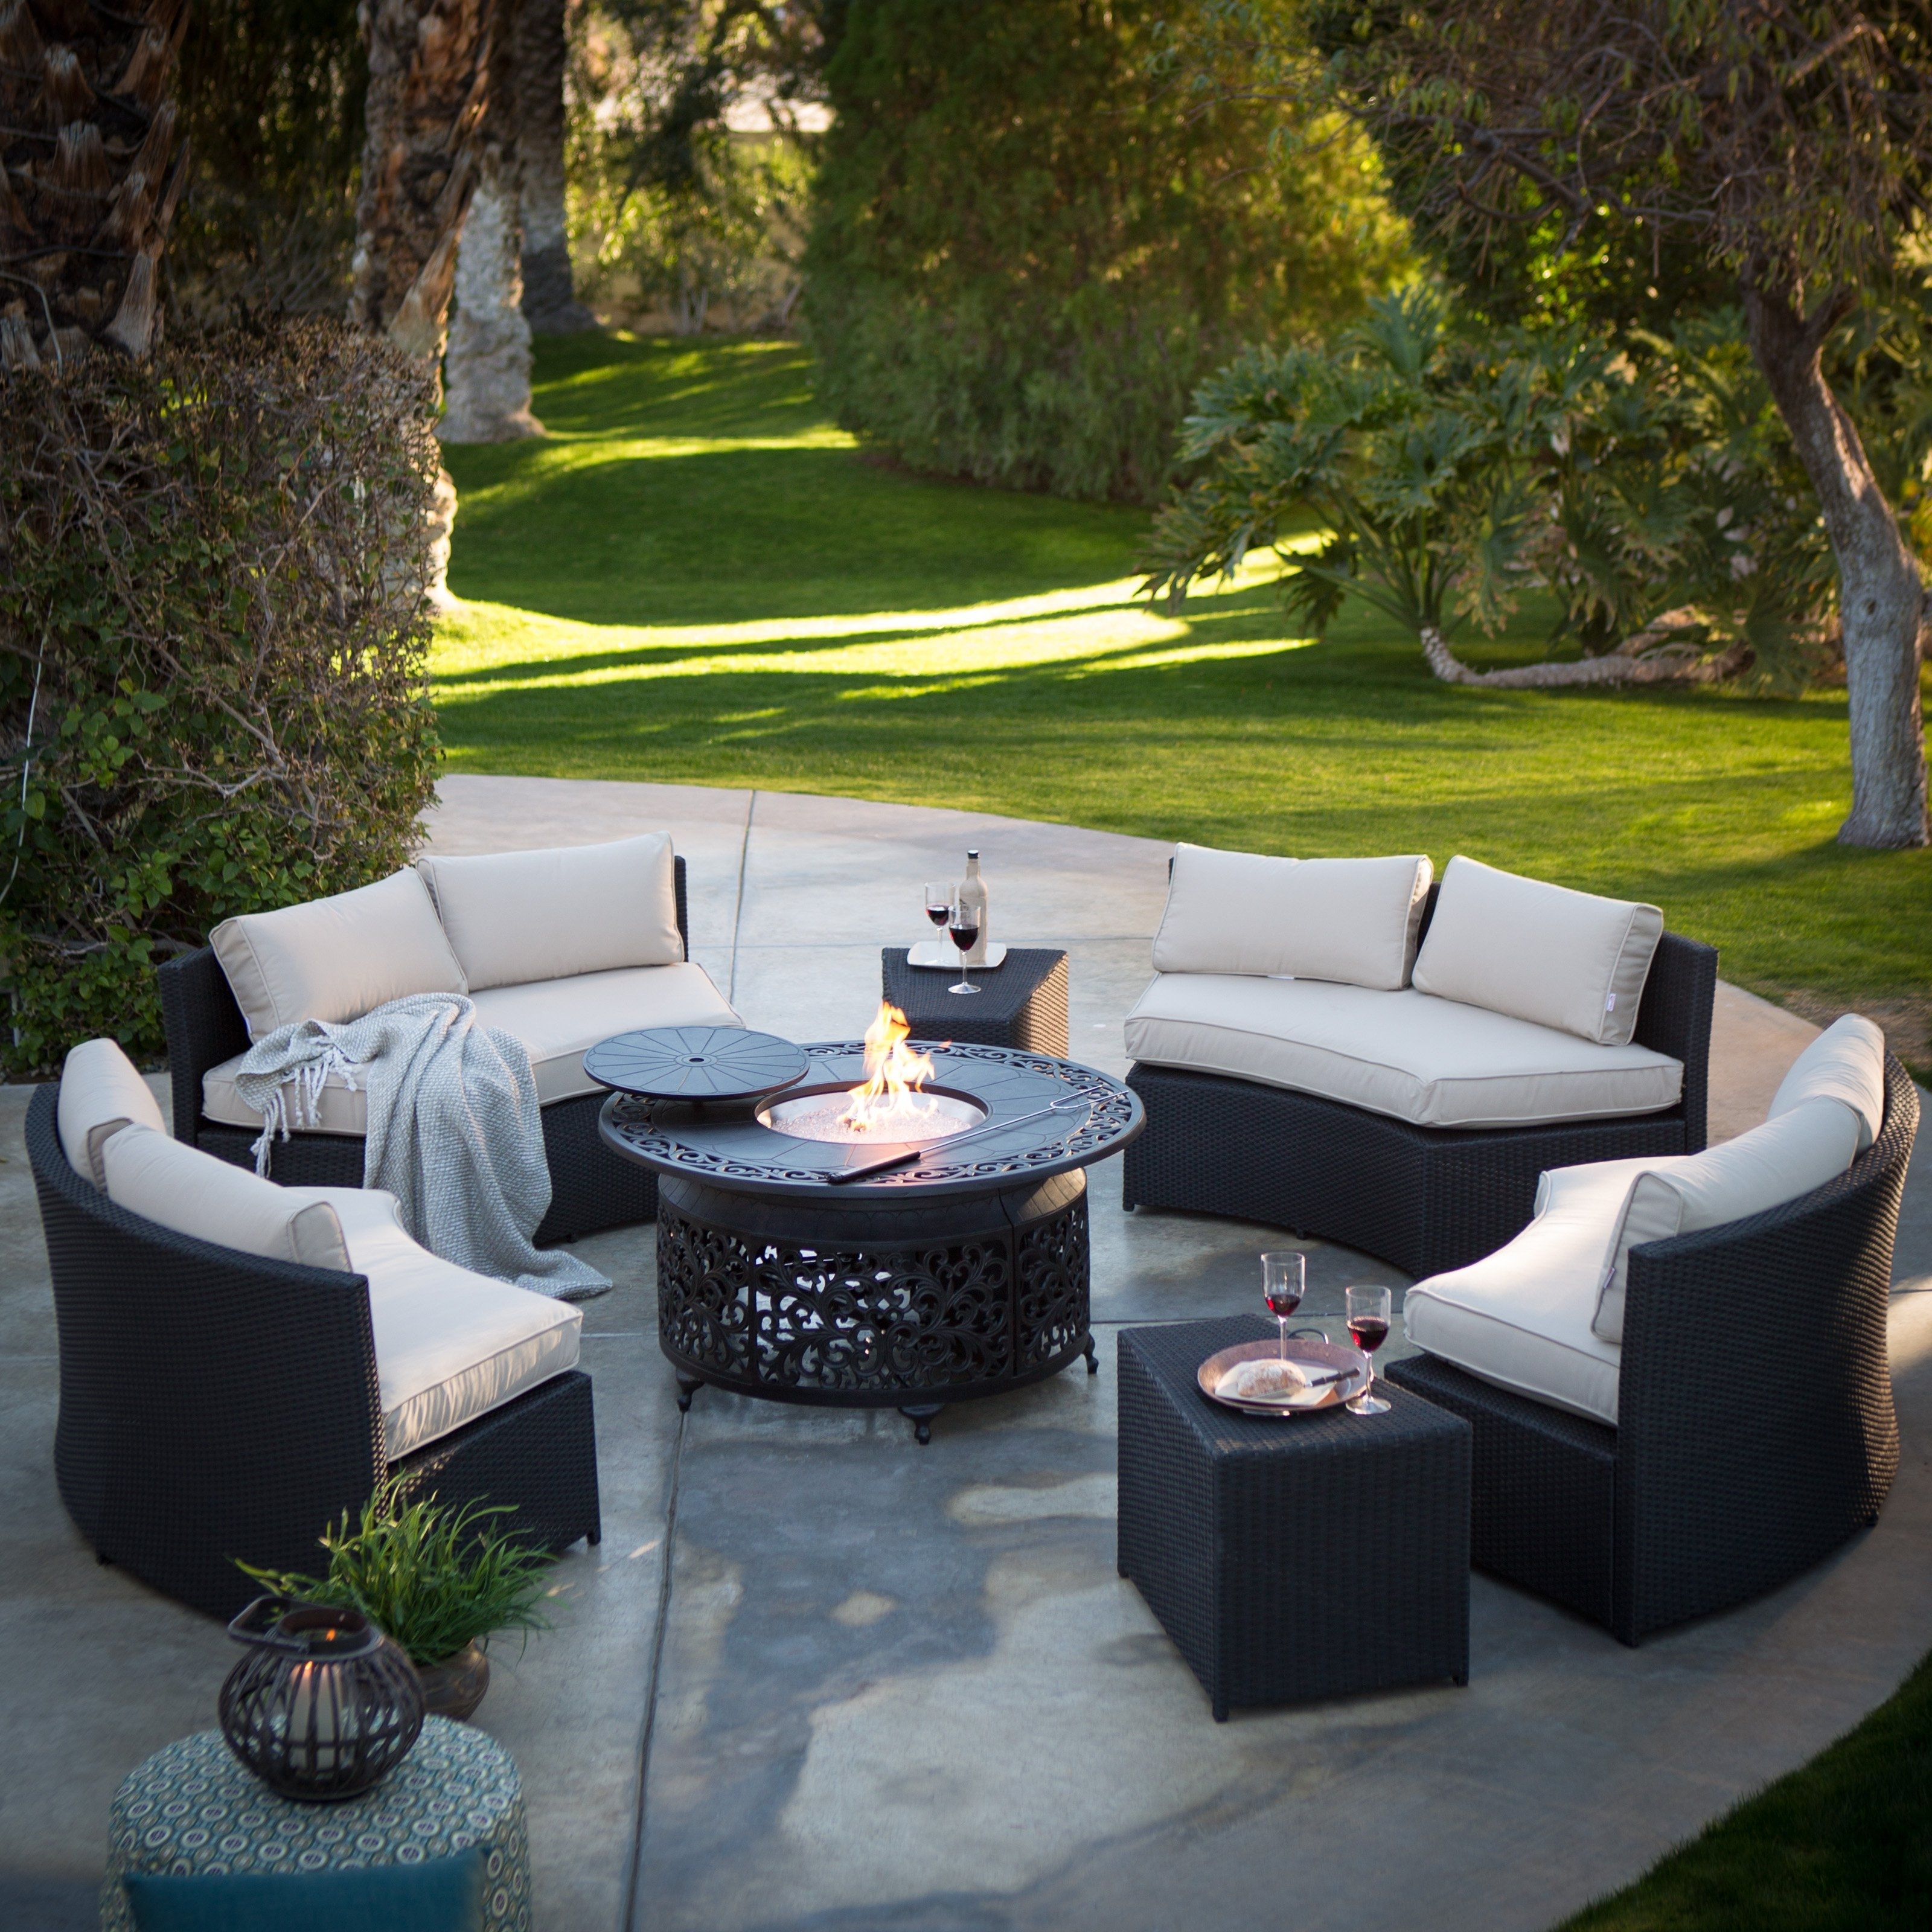 Round Patio Conversation Sets Inside Most Popular Patio Sun Screens Tags : Patio Furniture Conversation Set Outdoor (View 3 of 15)